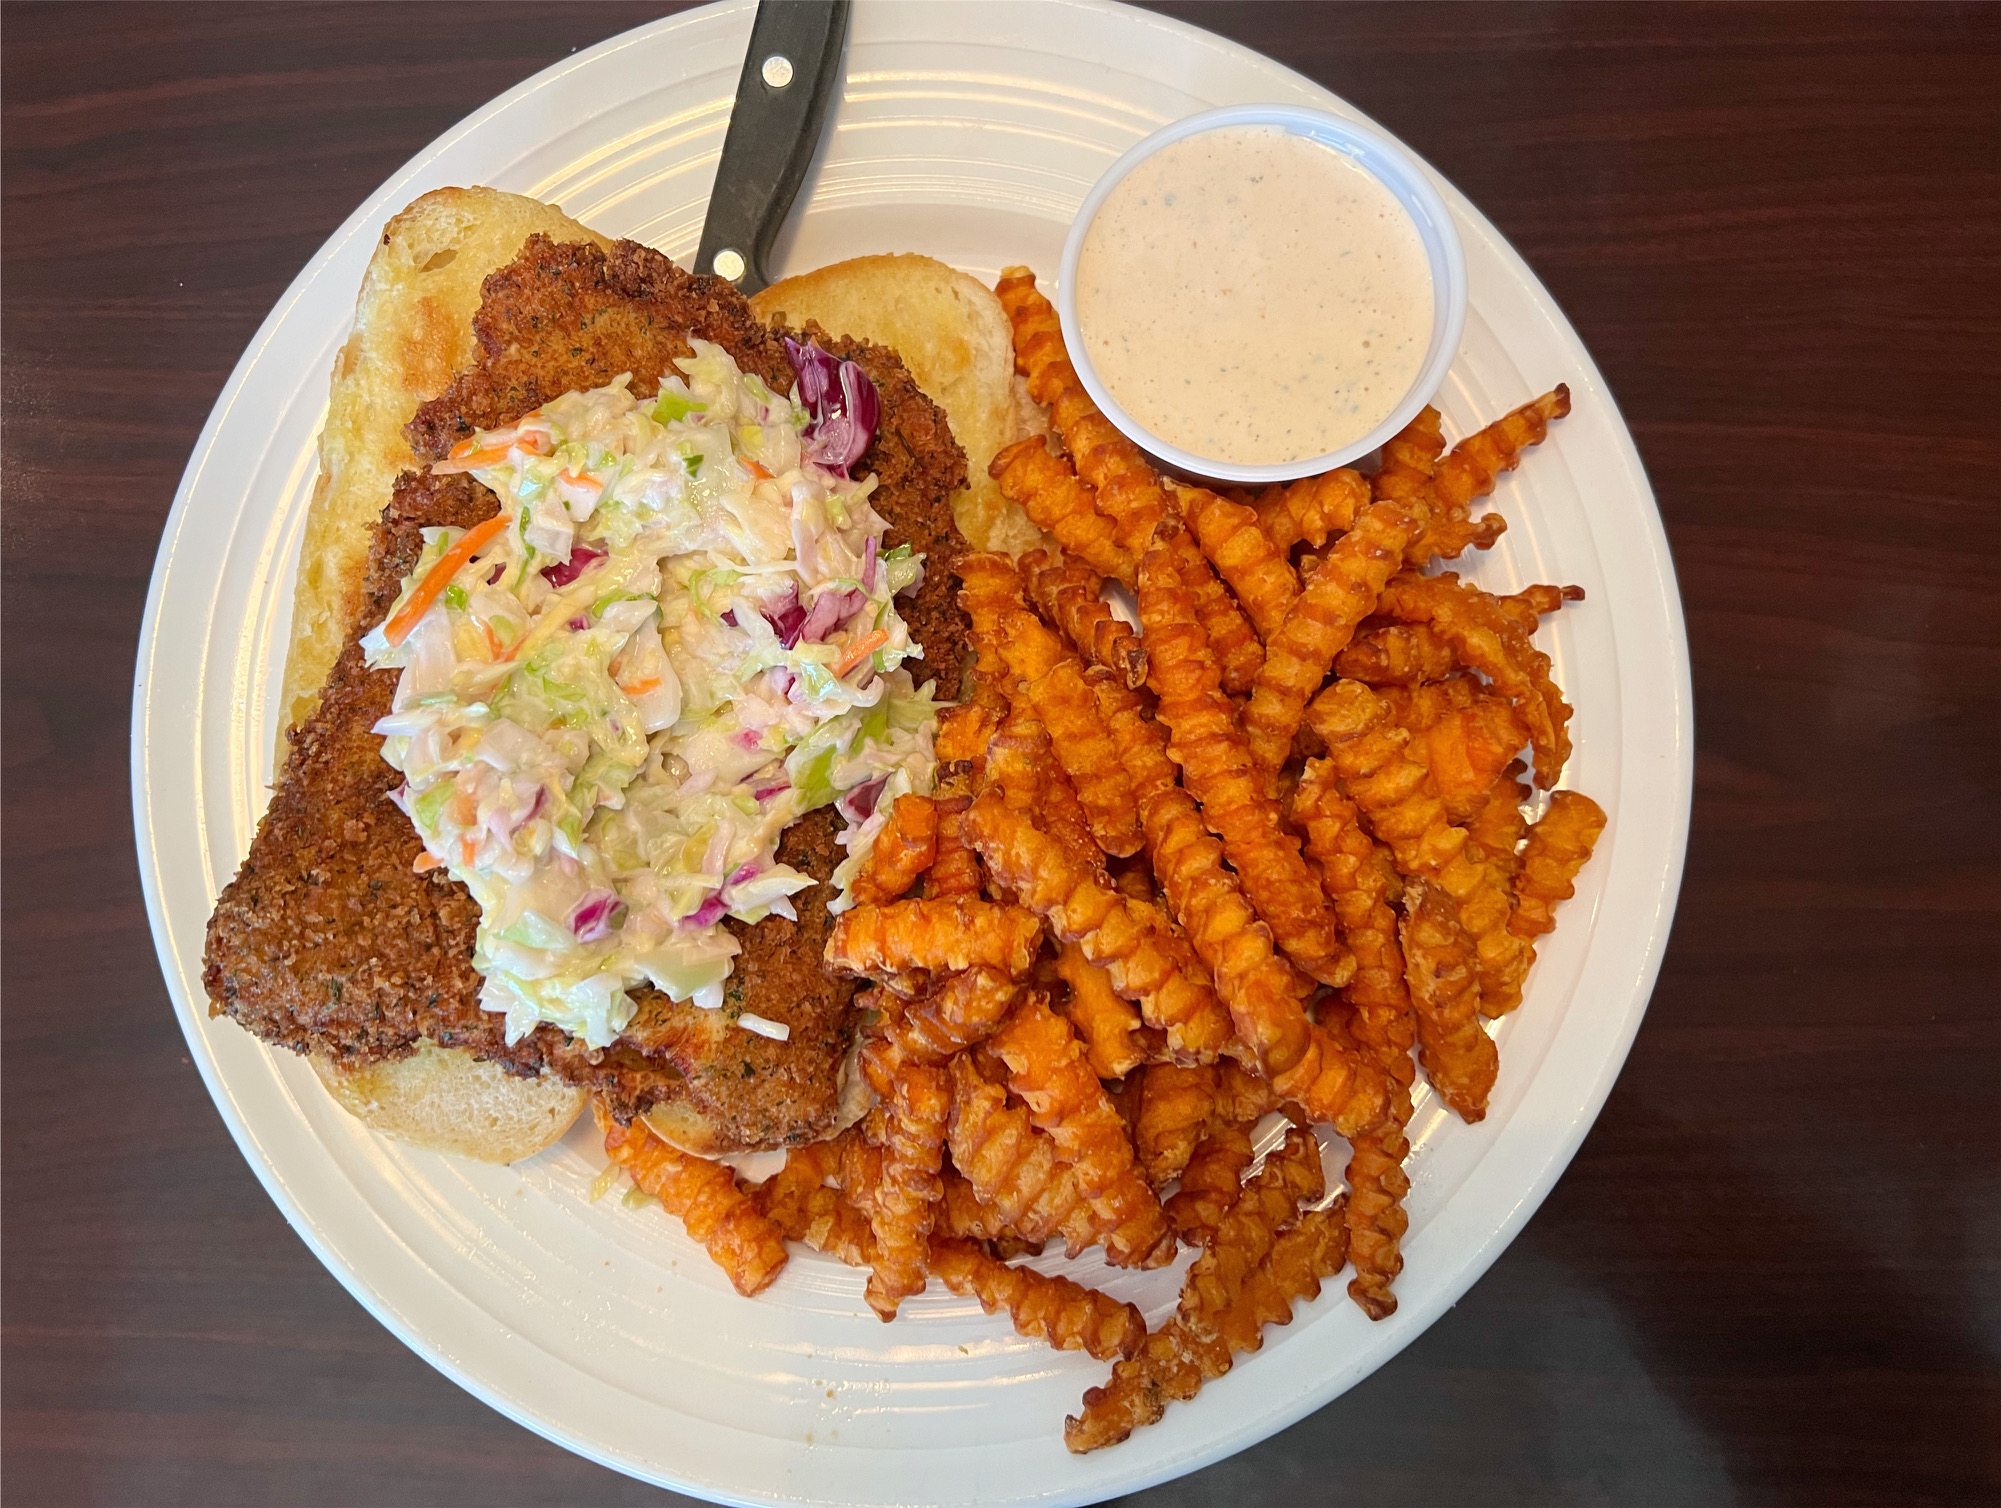 On a white plate, there is a sandwich with a large piece of fried breaded fish with a scoop of creamy coleslaw on top. Photo by Alyssa Buckley.